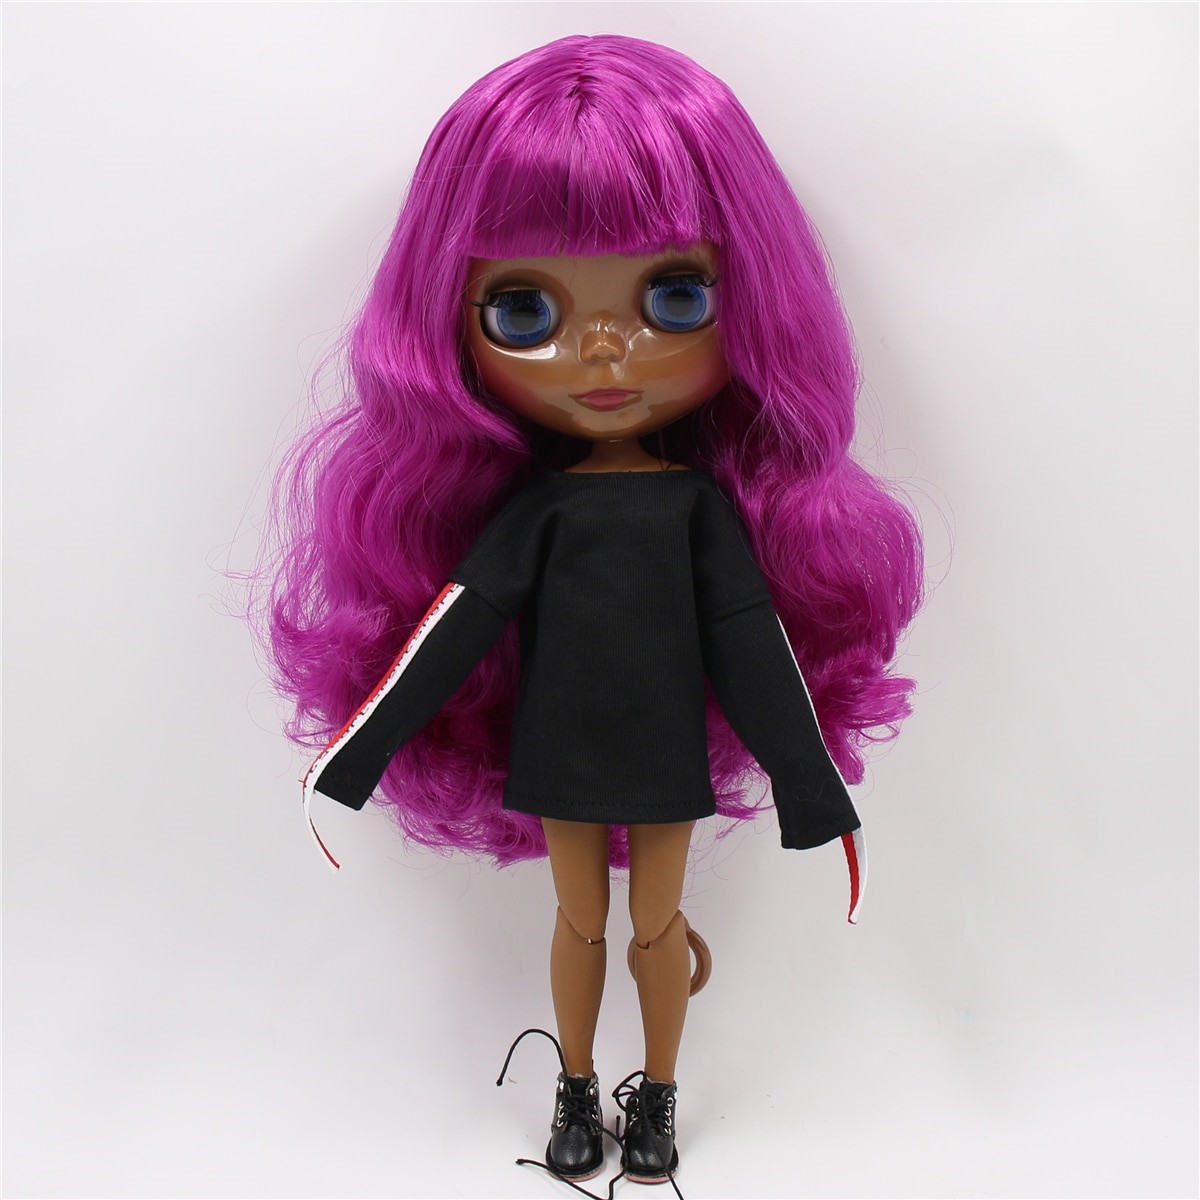 Neo Blythe Doll with Pink Hair, Black skin, Shiny Face & Jointed Body Black Skin Nude Blythe Doll Pink Hair Nude Blythe Doll Shiny Face Nude Blythe Doll